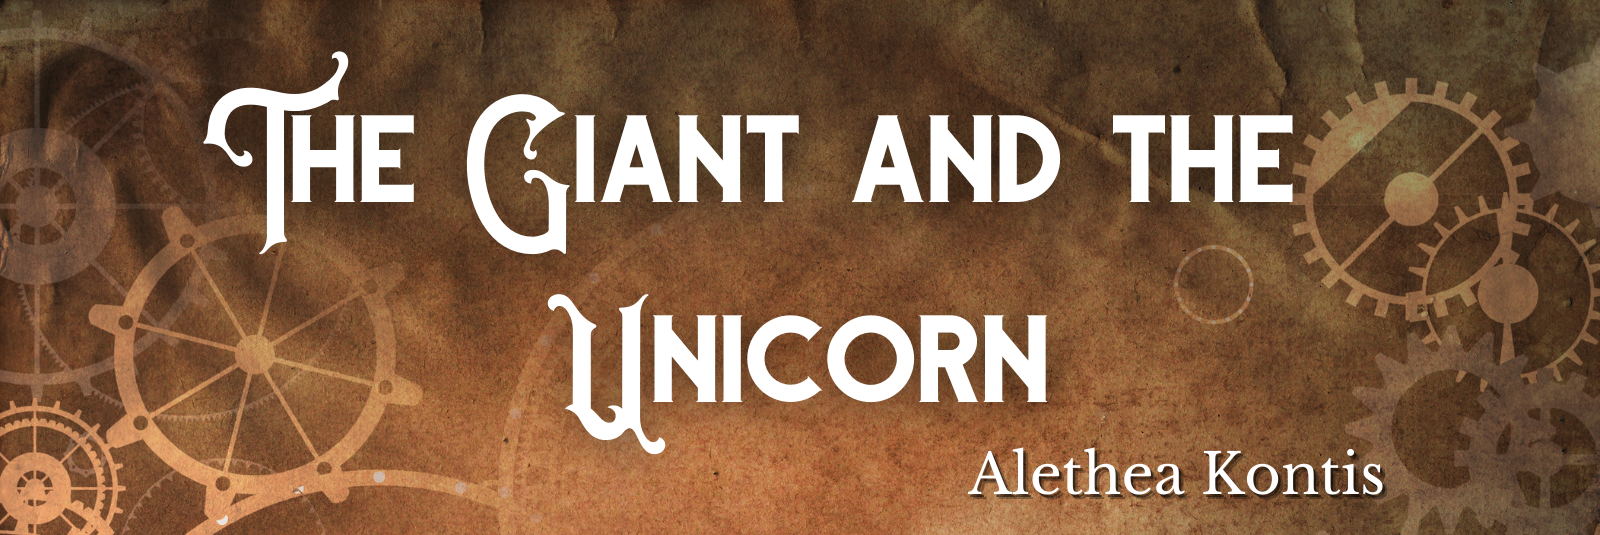 The Giant and the Unicorn by Alethea Kontis